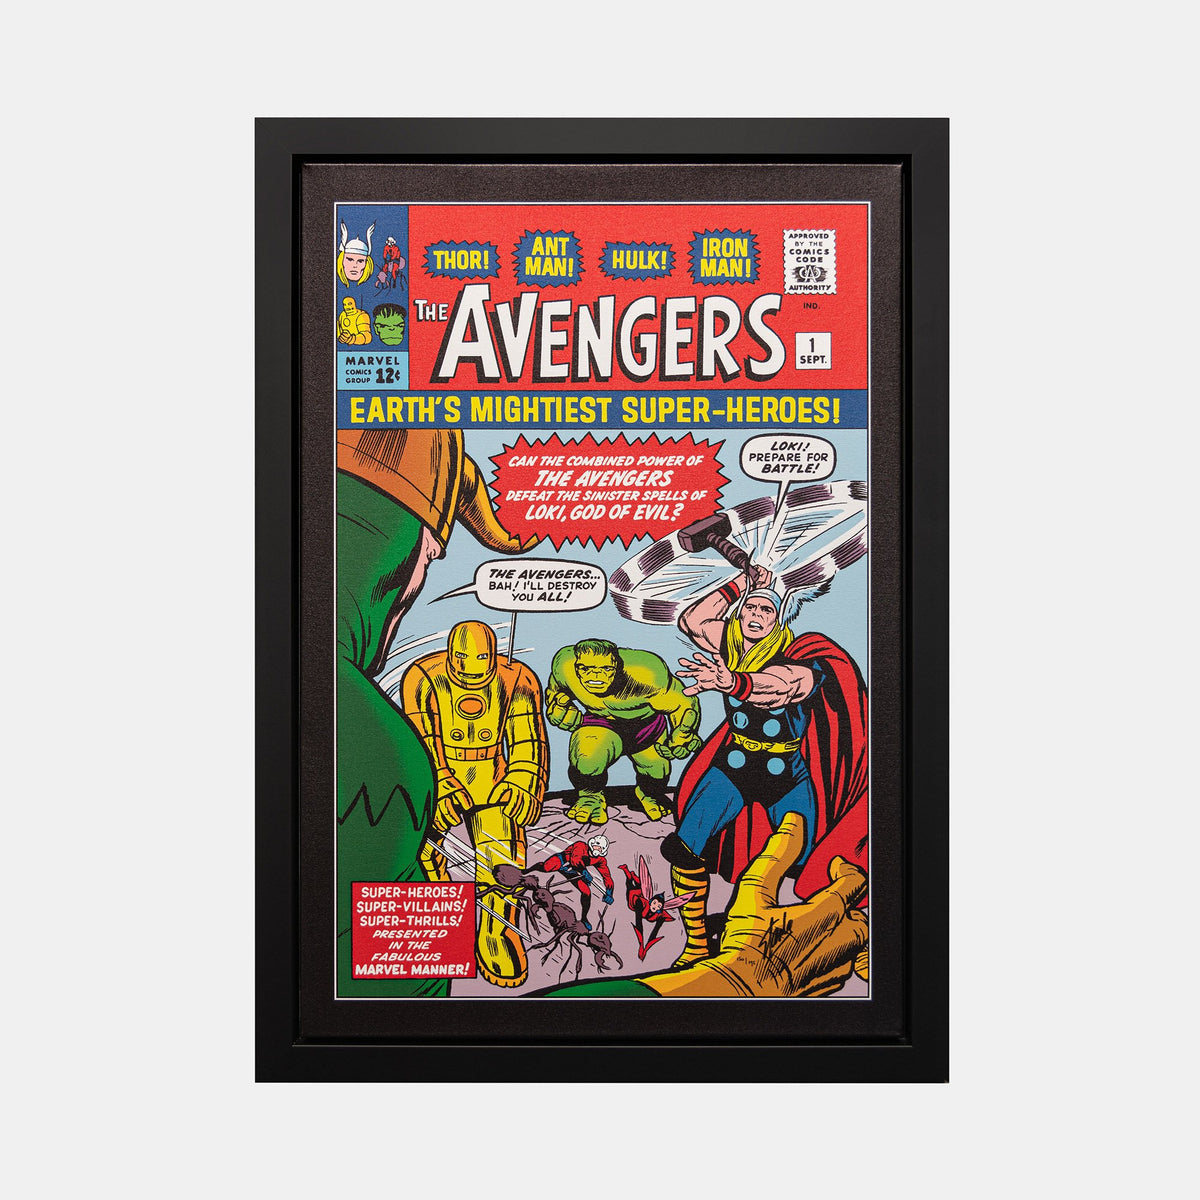 Stan Lee Signed The Avengers 1 Earths Mightiest Super Heroes Box